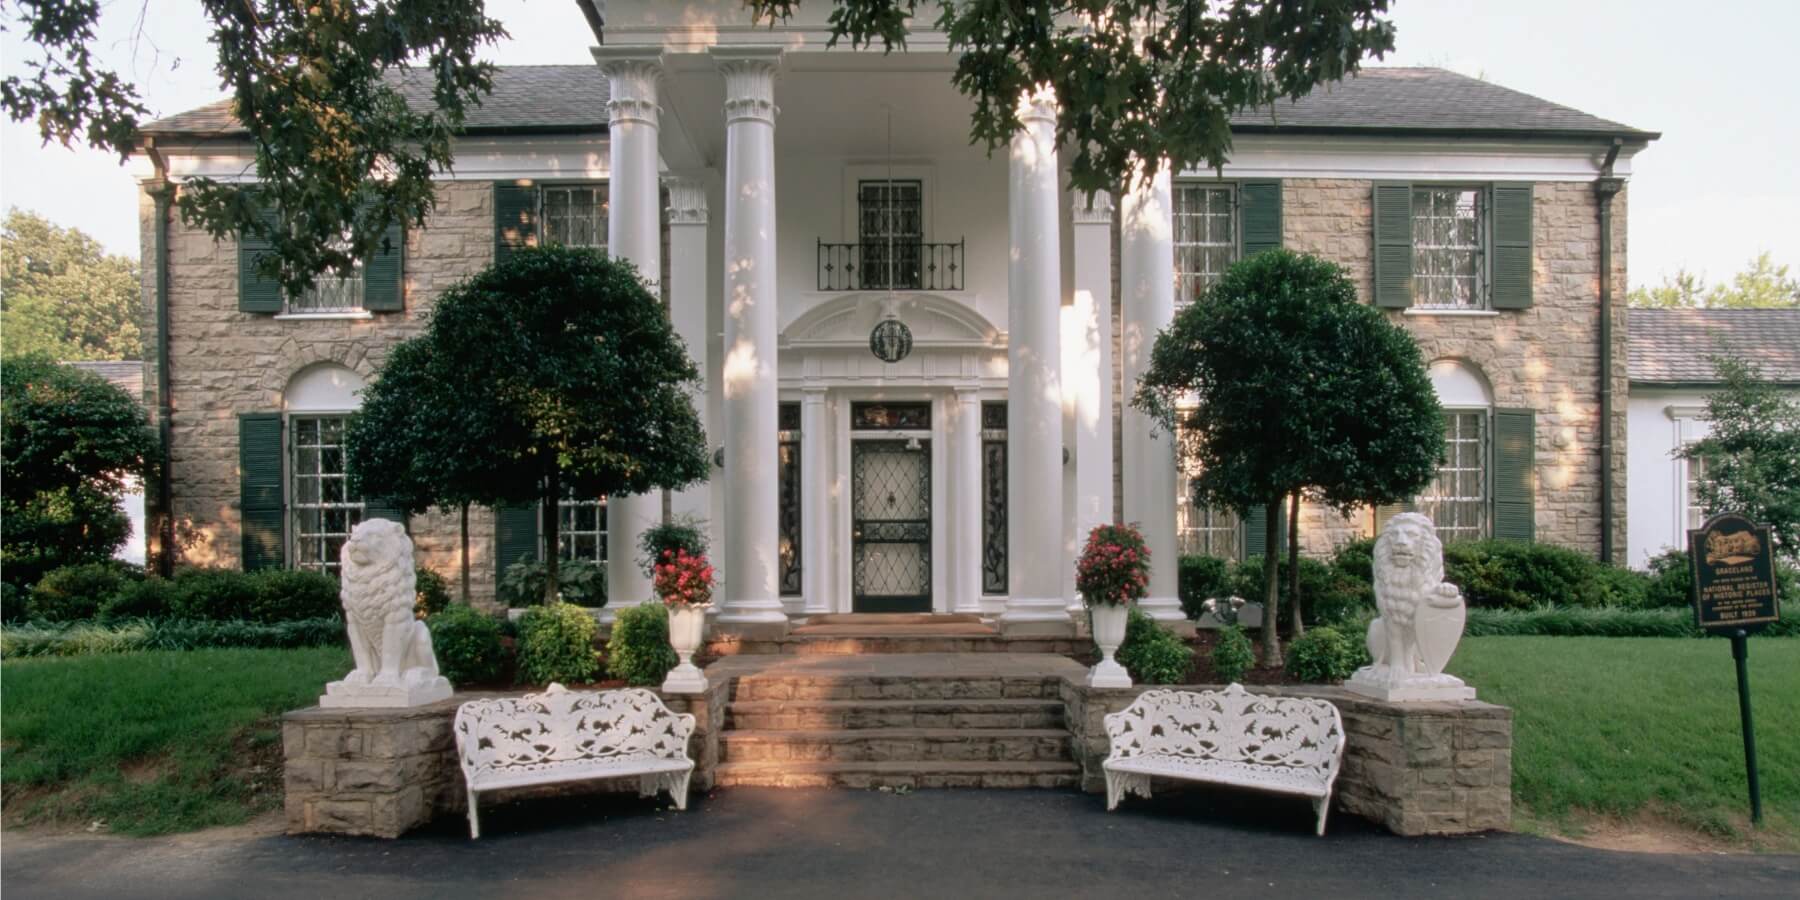 The exterior of Graceland in Memphis, TN.